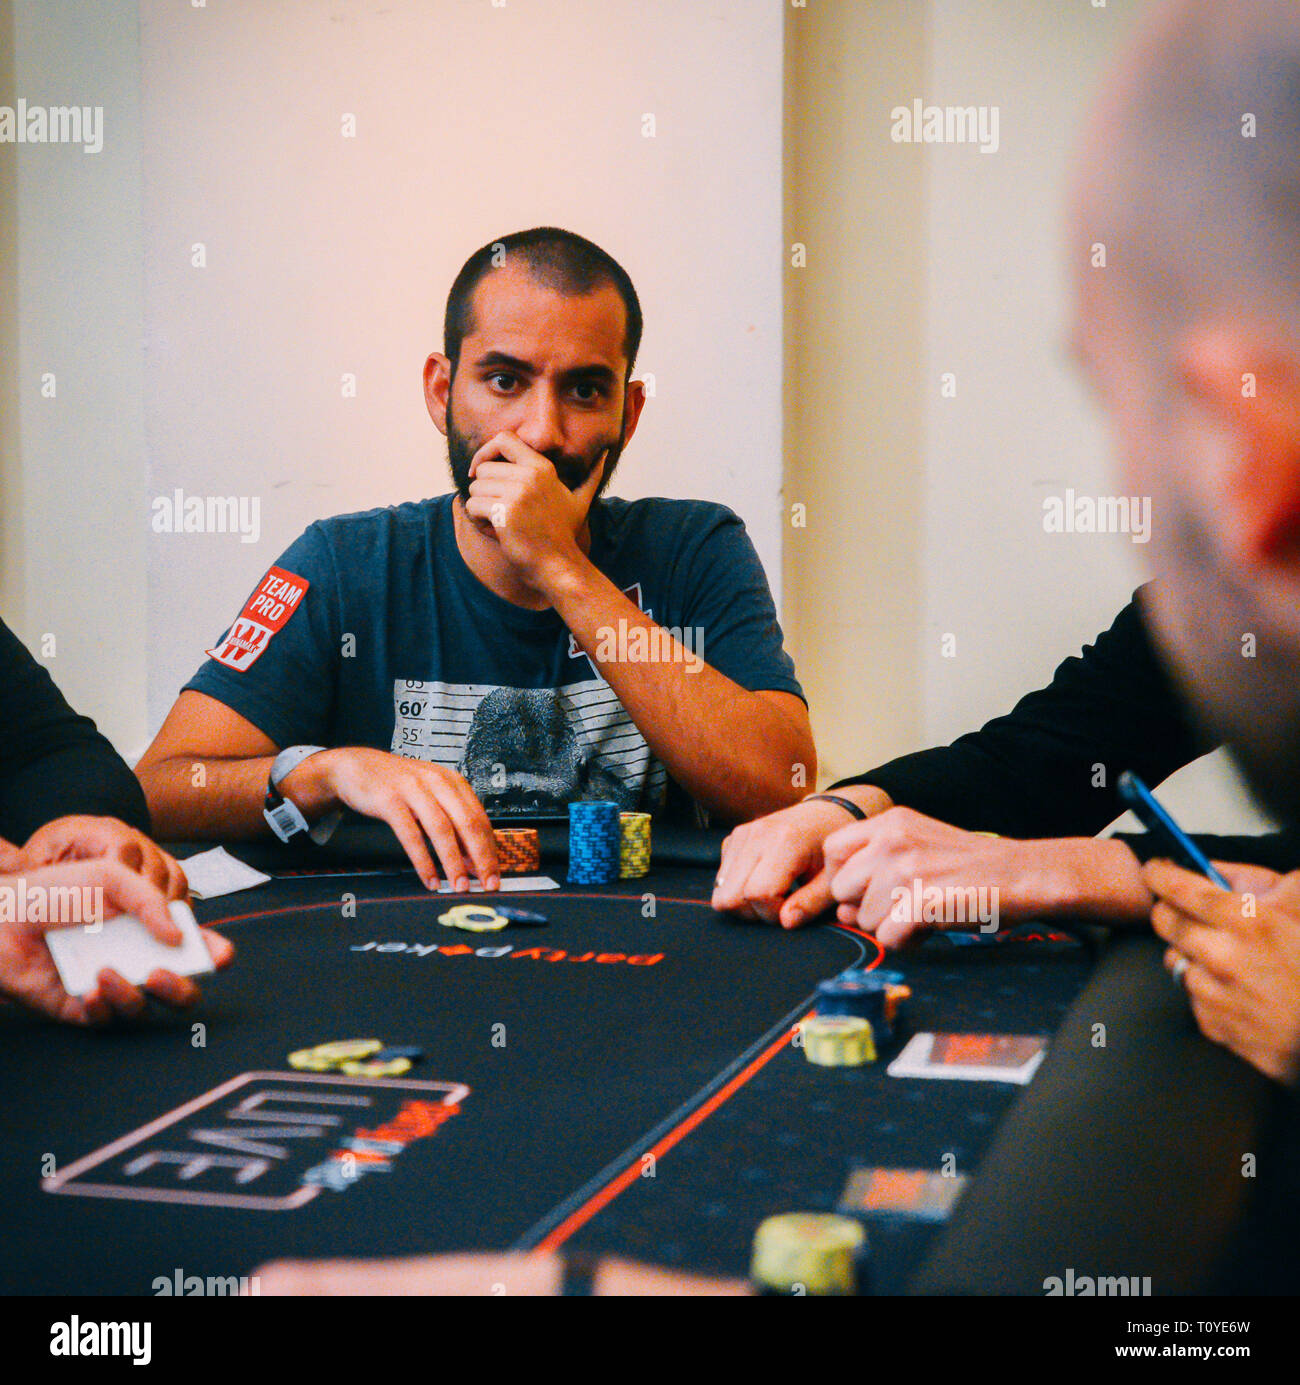 Rio de Janeiro, Brazil - March 21st, 2019: Joao Vieira, Professional Portuguese player at the Main Event of the PartyPoker LIVE MILLIONS South America 2019 occuring at the luxurious Copacabana Palace Belmond Hotel in Rio de Janeiro, Brazil from March 15th through March 24th, 2019. Credit: Alexandre Rotenberg/Alamy Live News Stock Photo